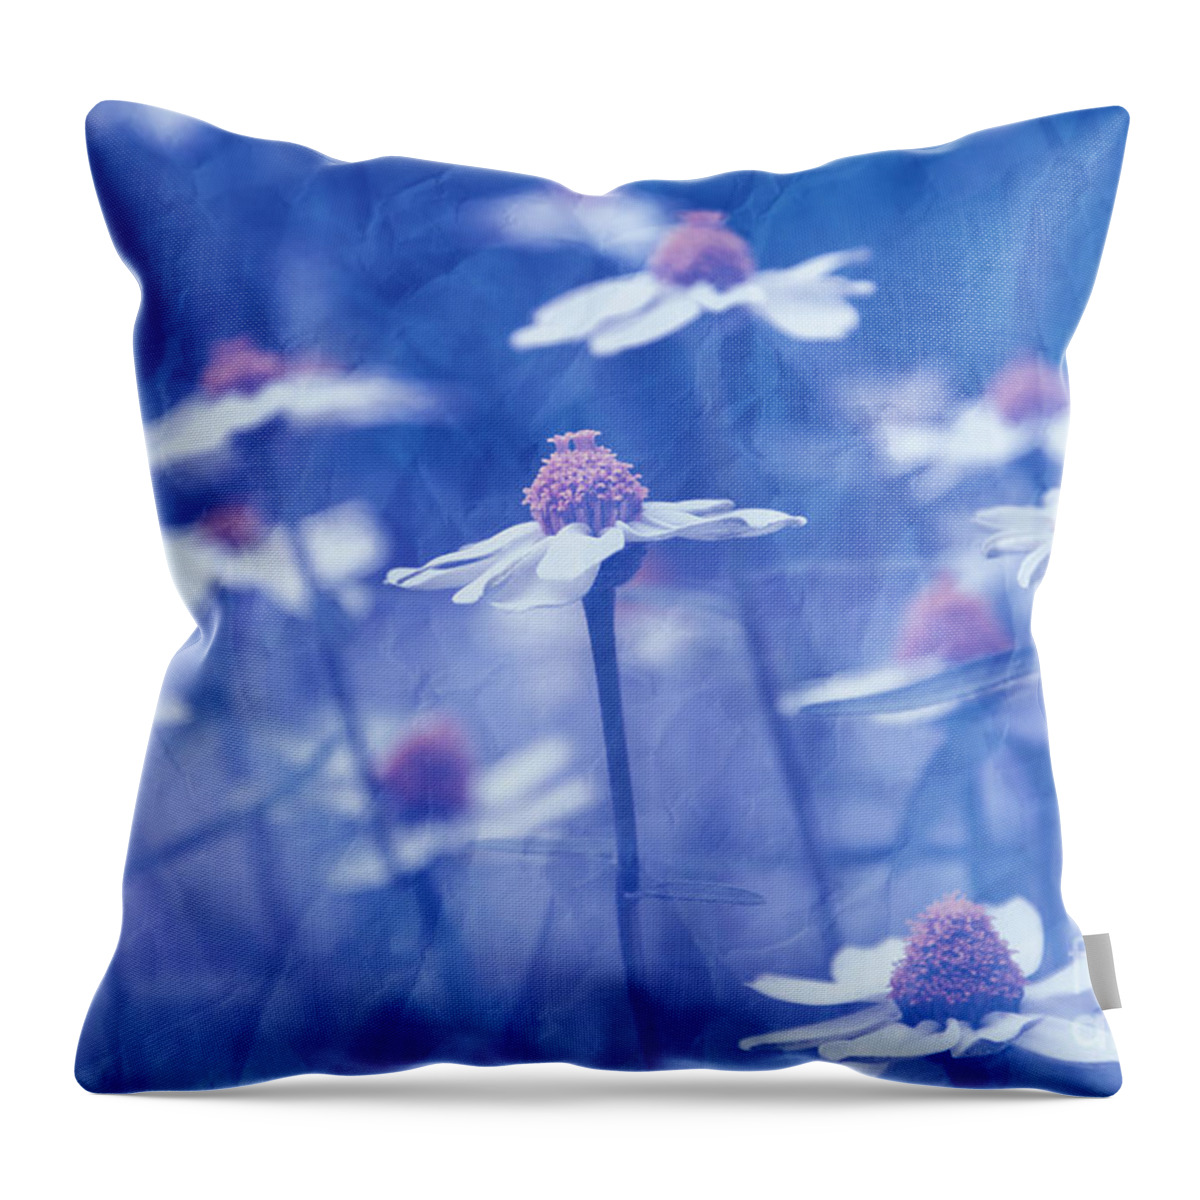 Daisies Throw Pillow featuring the photograph Imagine 06ht01 by Variance Collections